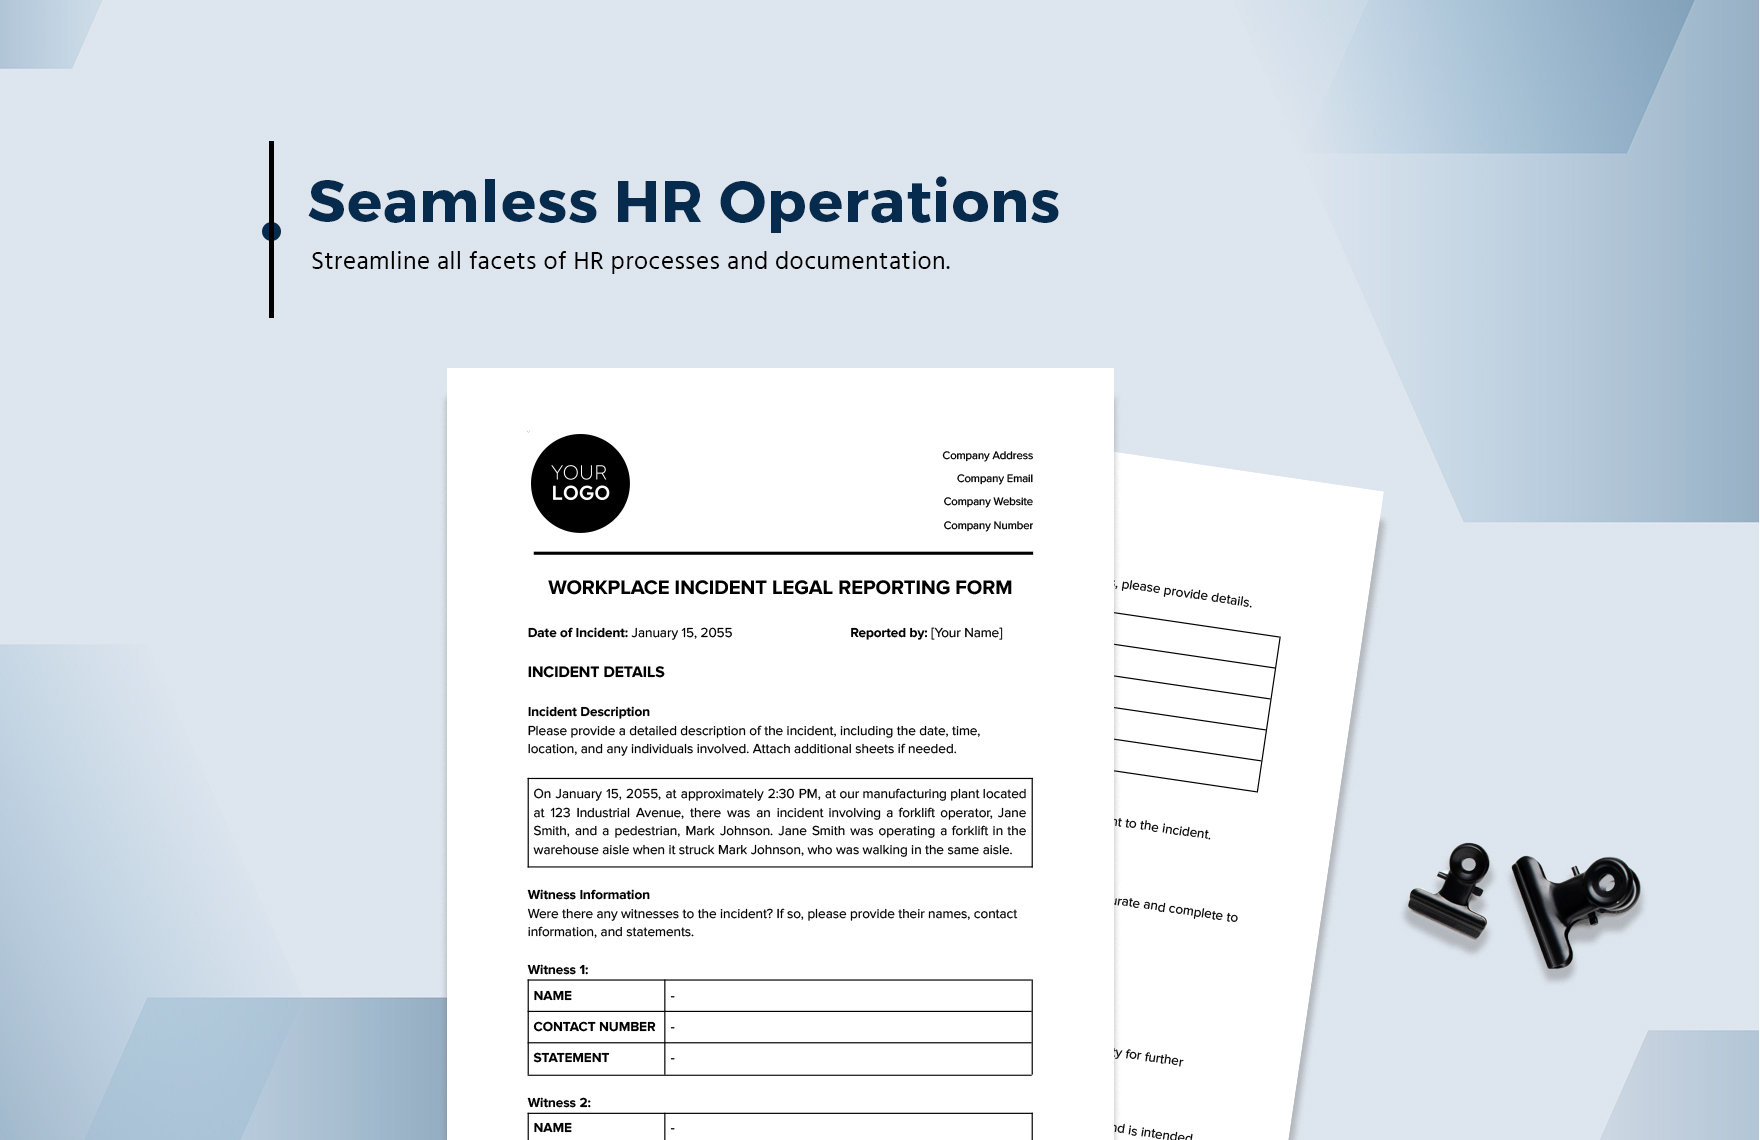 Workplace Incident Legal Reporting Form HR Template